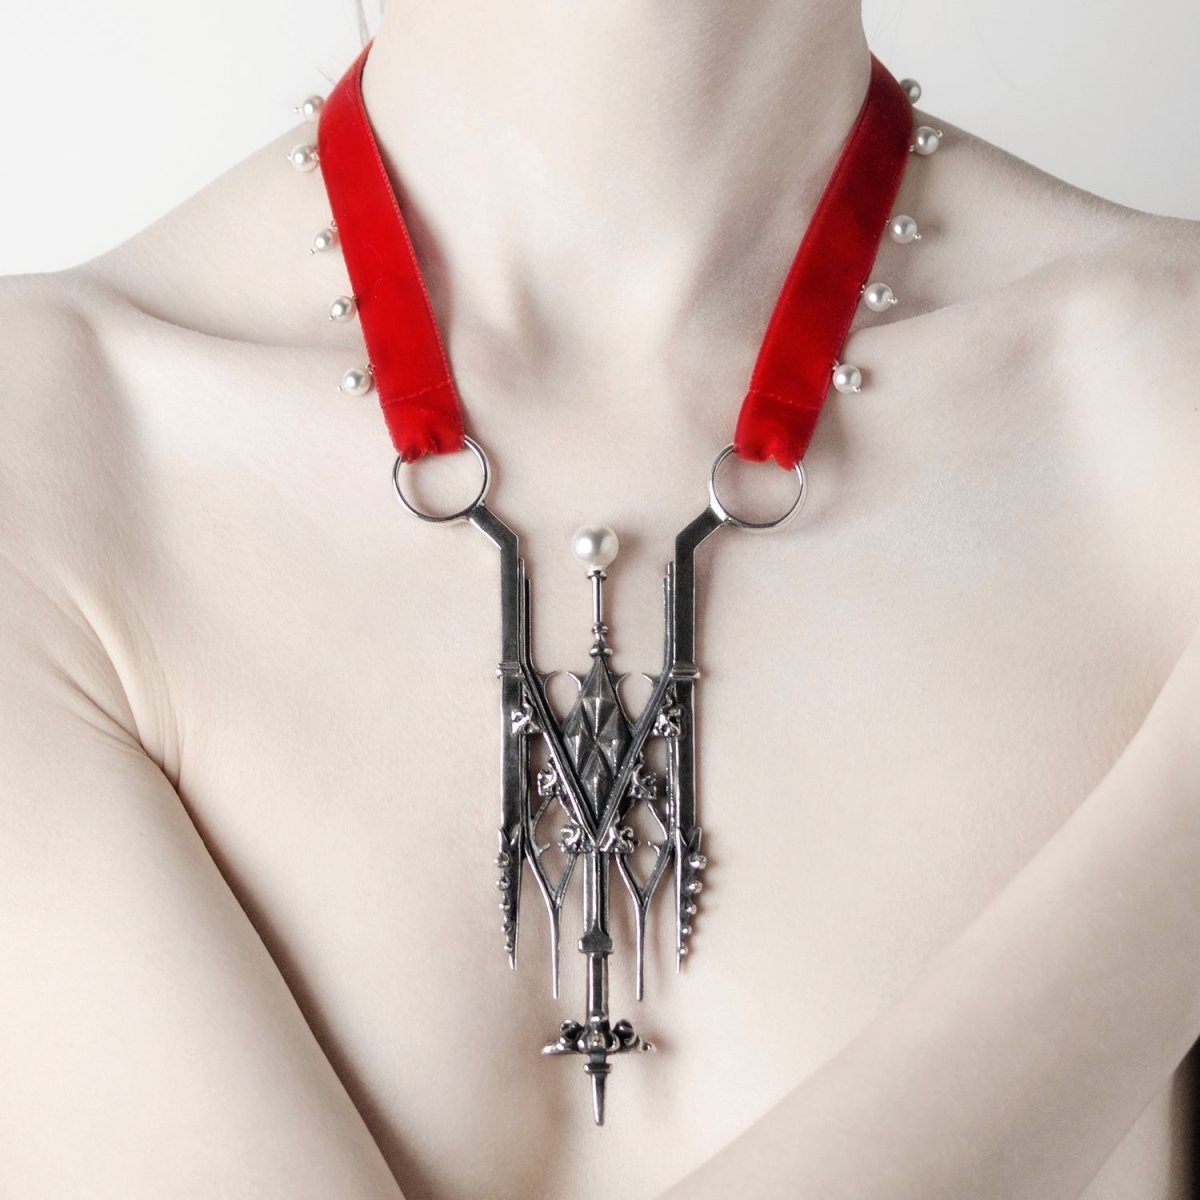 PINNACLE NECKLACE - Macabre Gadgets Store